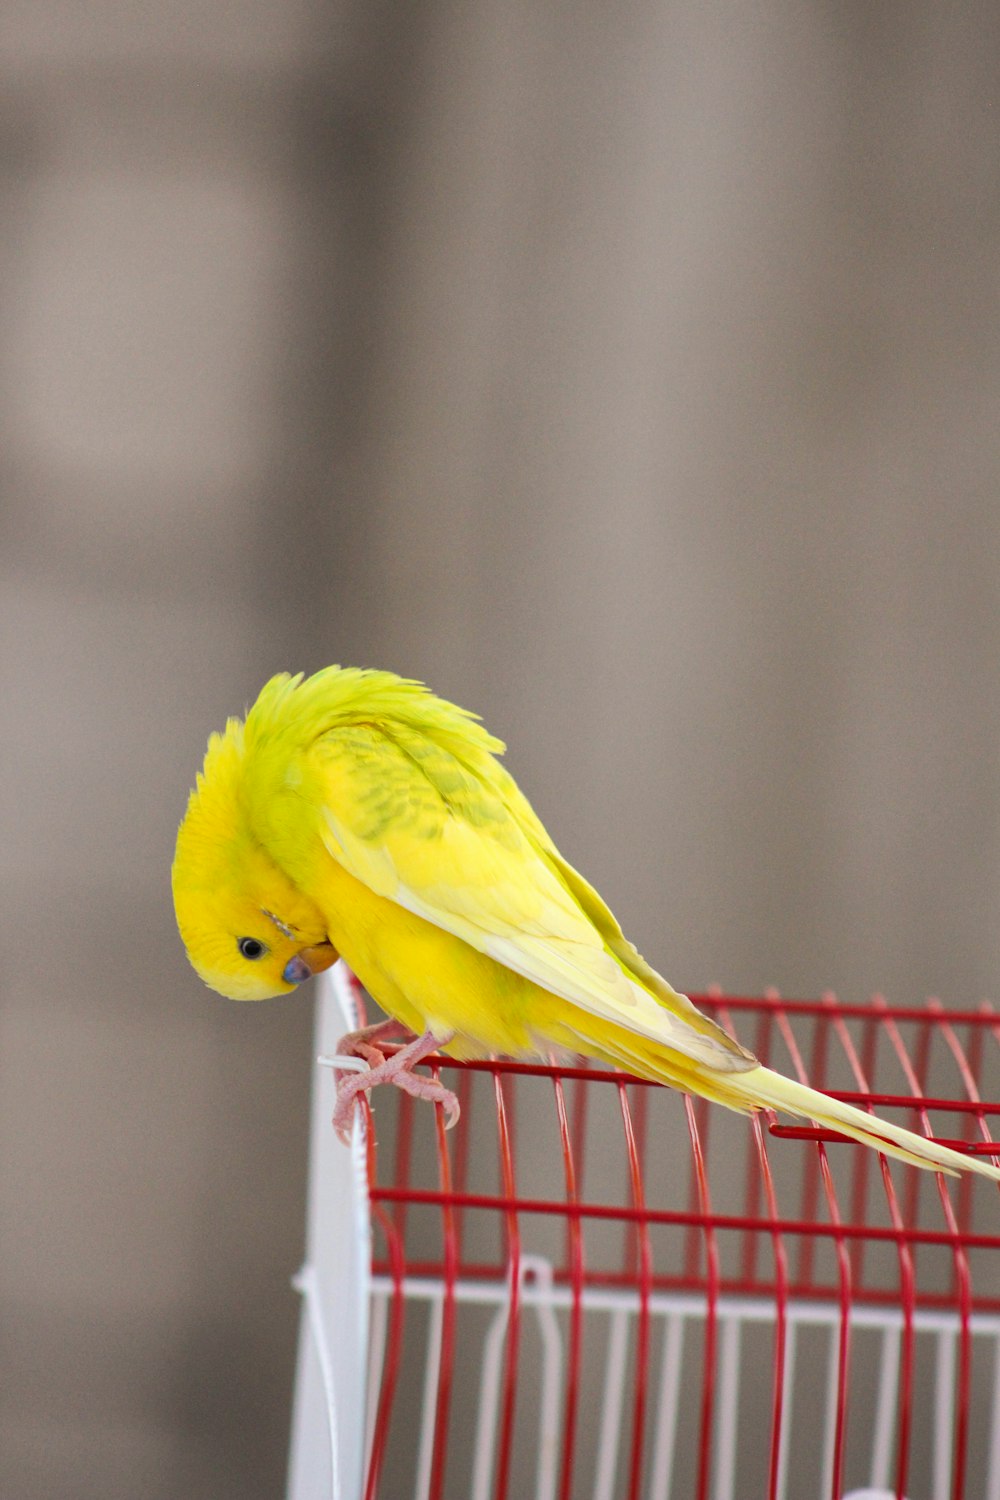 yellow bird on red wire